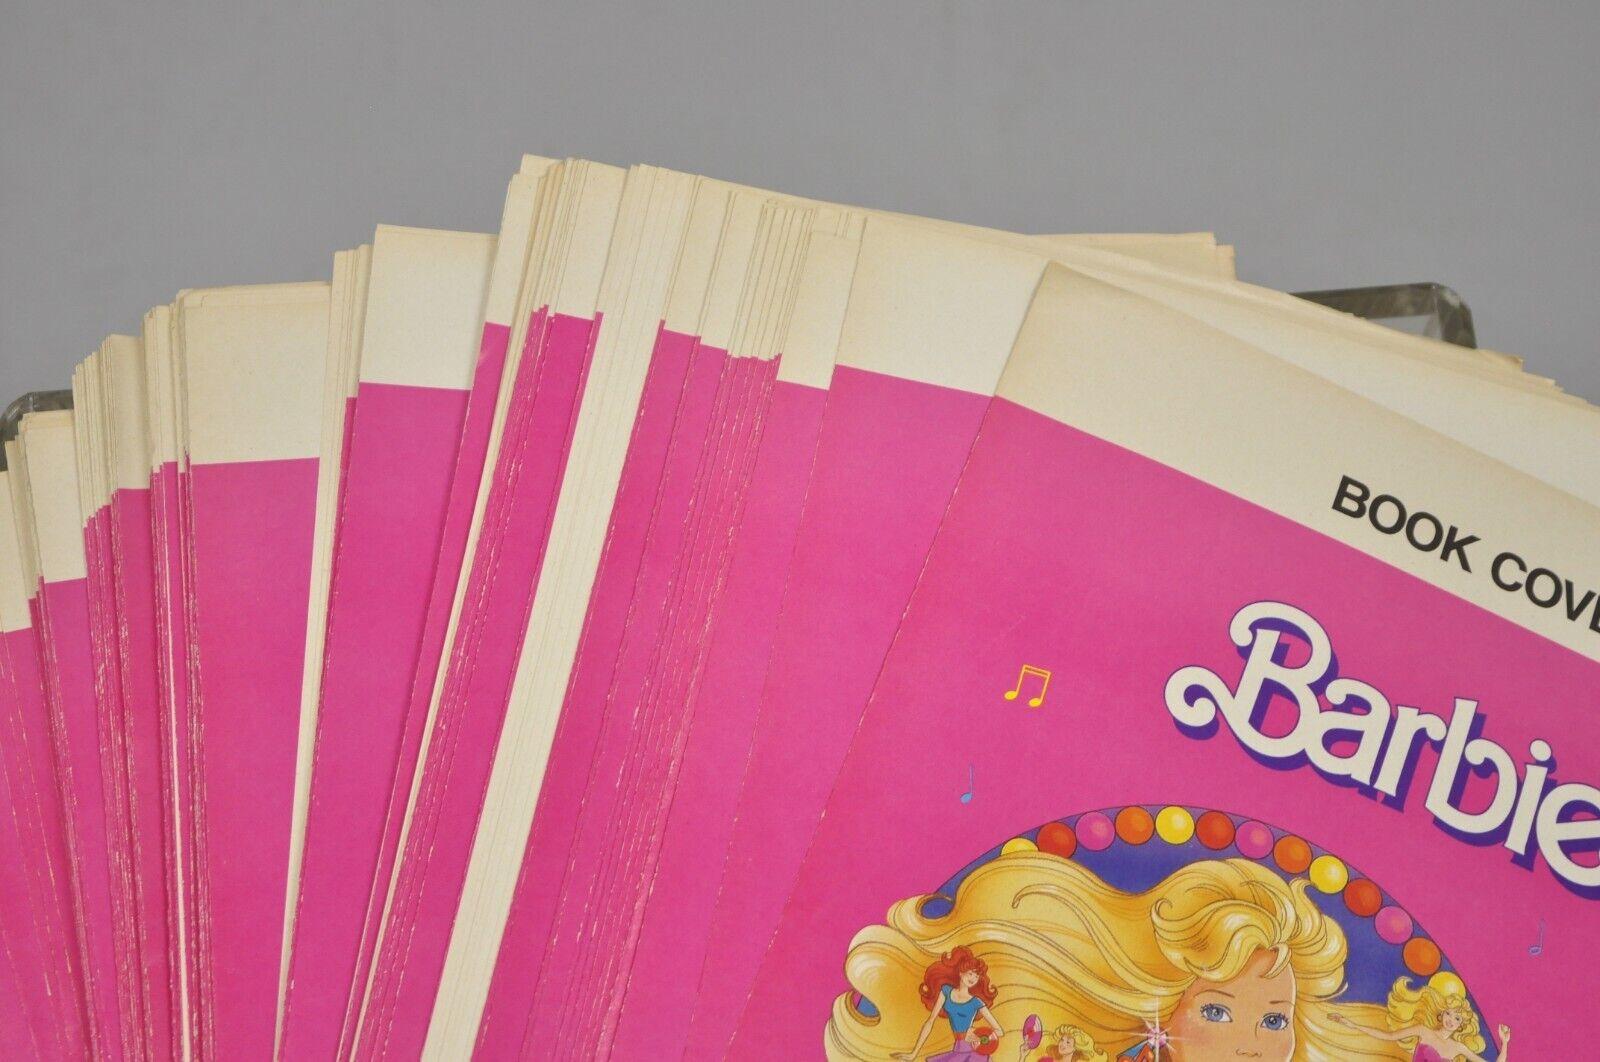 Late 20th Century Vintage 1989 Barbie Mattel Original Pink Paper Book Covers NOS - Many Available For Sale